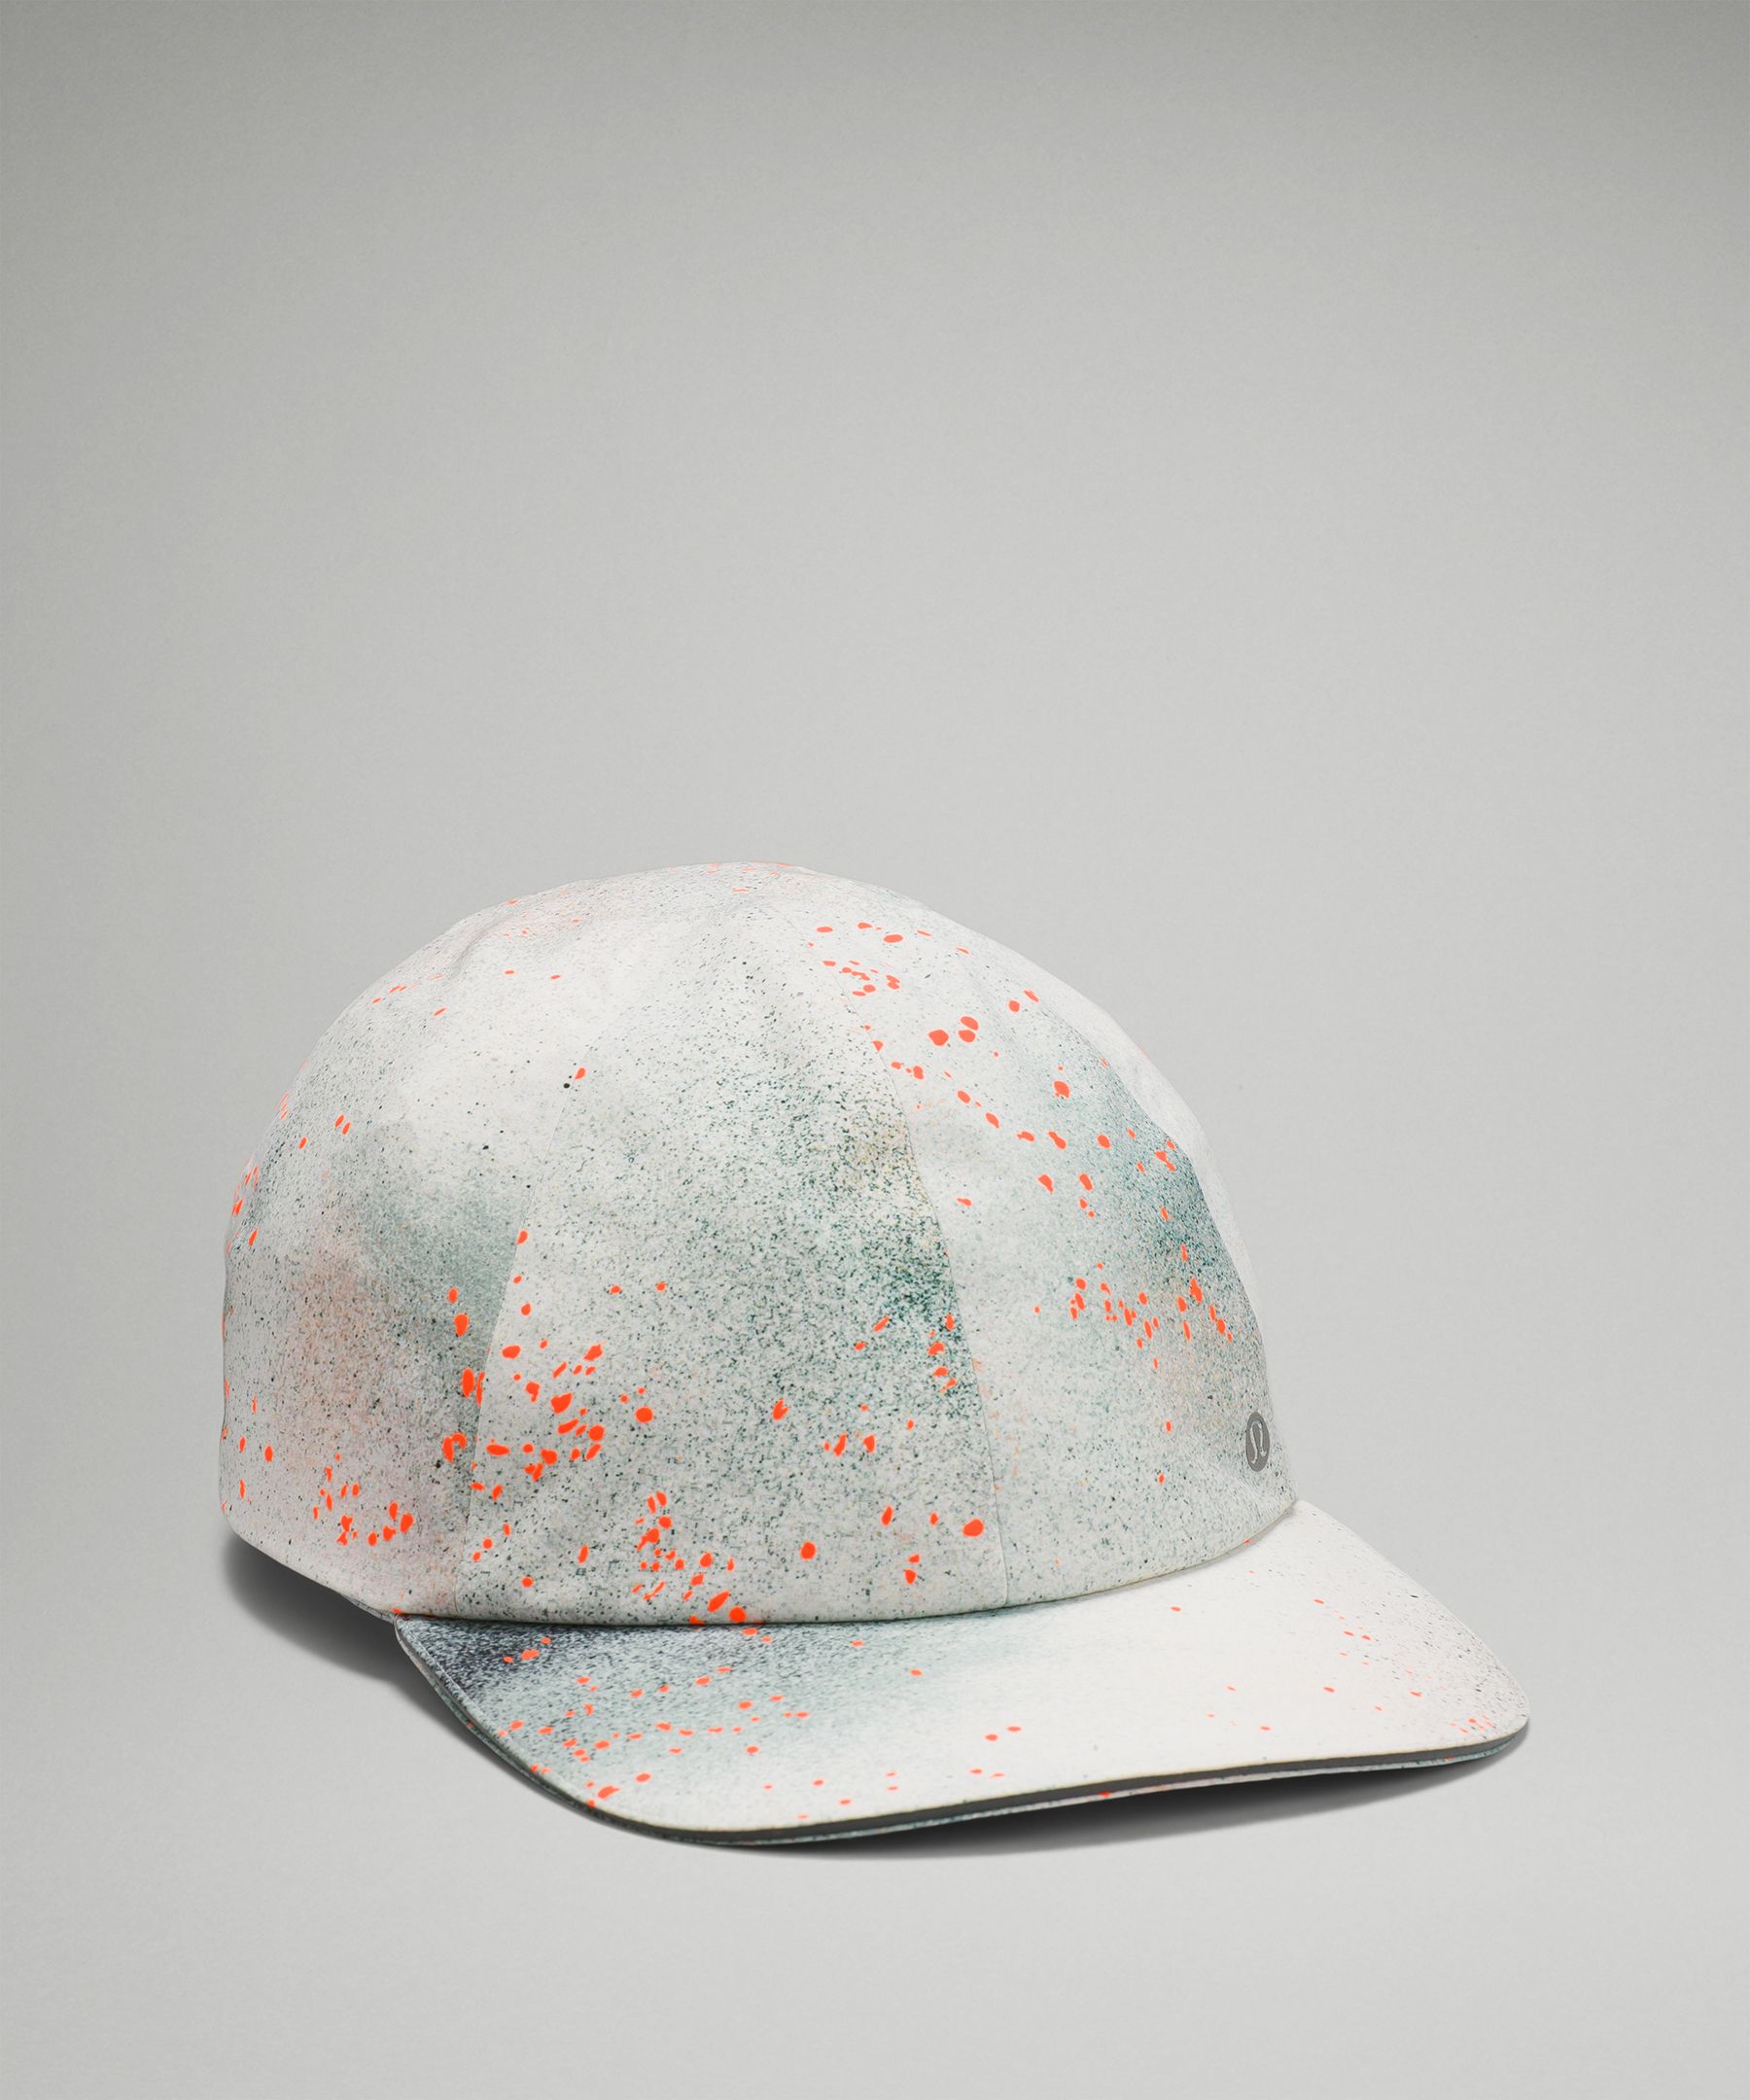 Lululemon Men's Fast And Free Running Hat In Spray Camo Silver Blue Sirius Reflective Highlight Orange